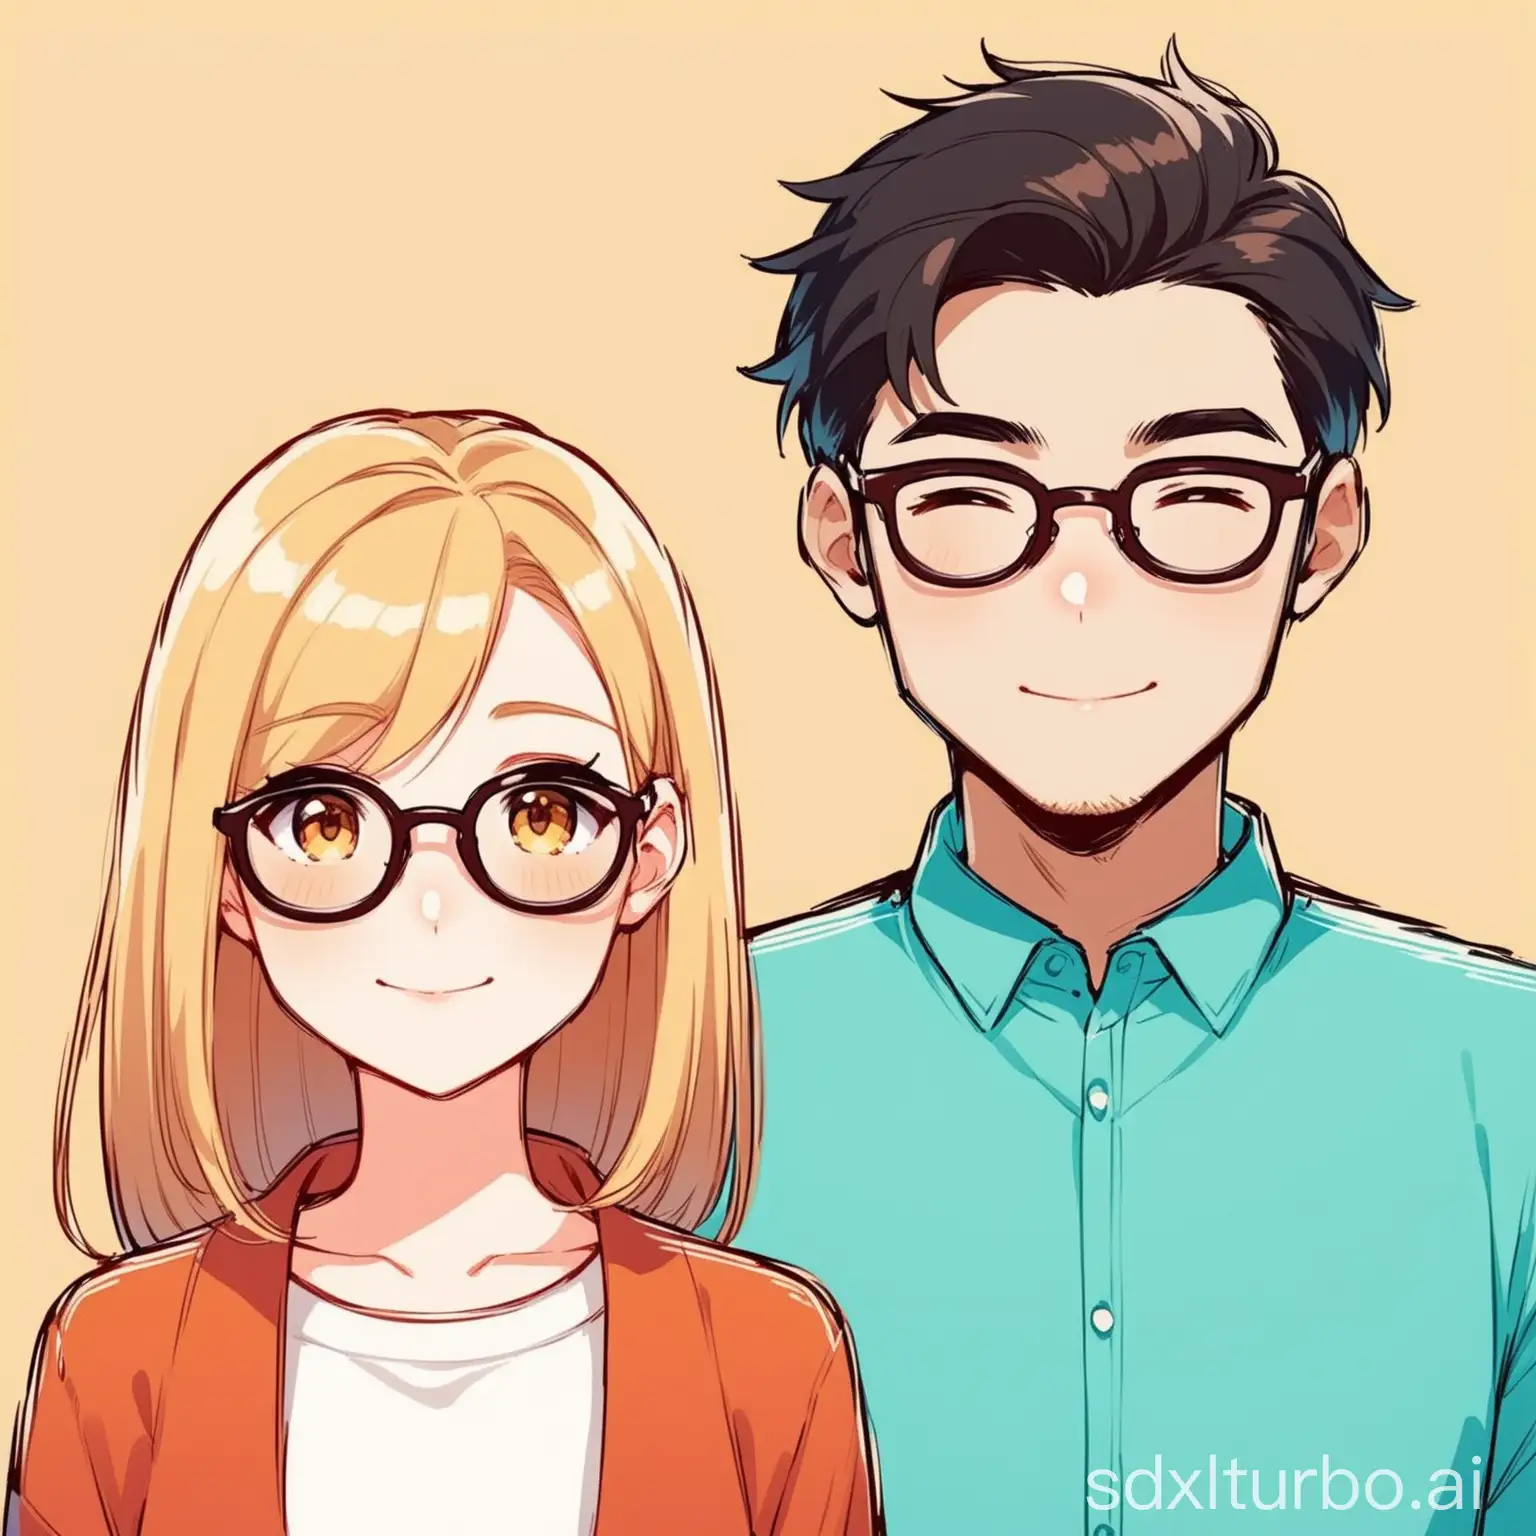 Animated cute style, couple avatar, side by side, man wearing glasses, woman not wearing glasses.